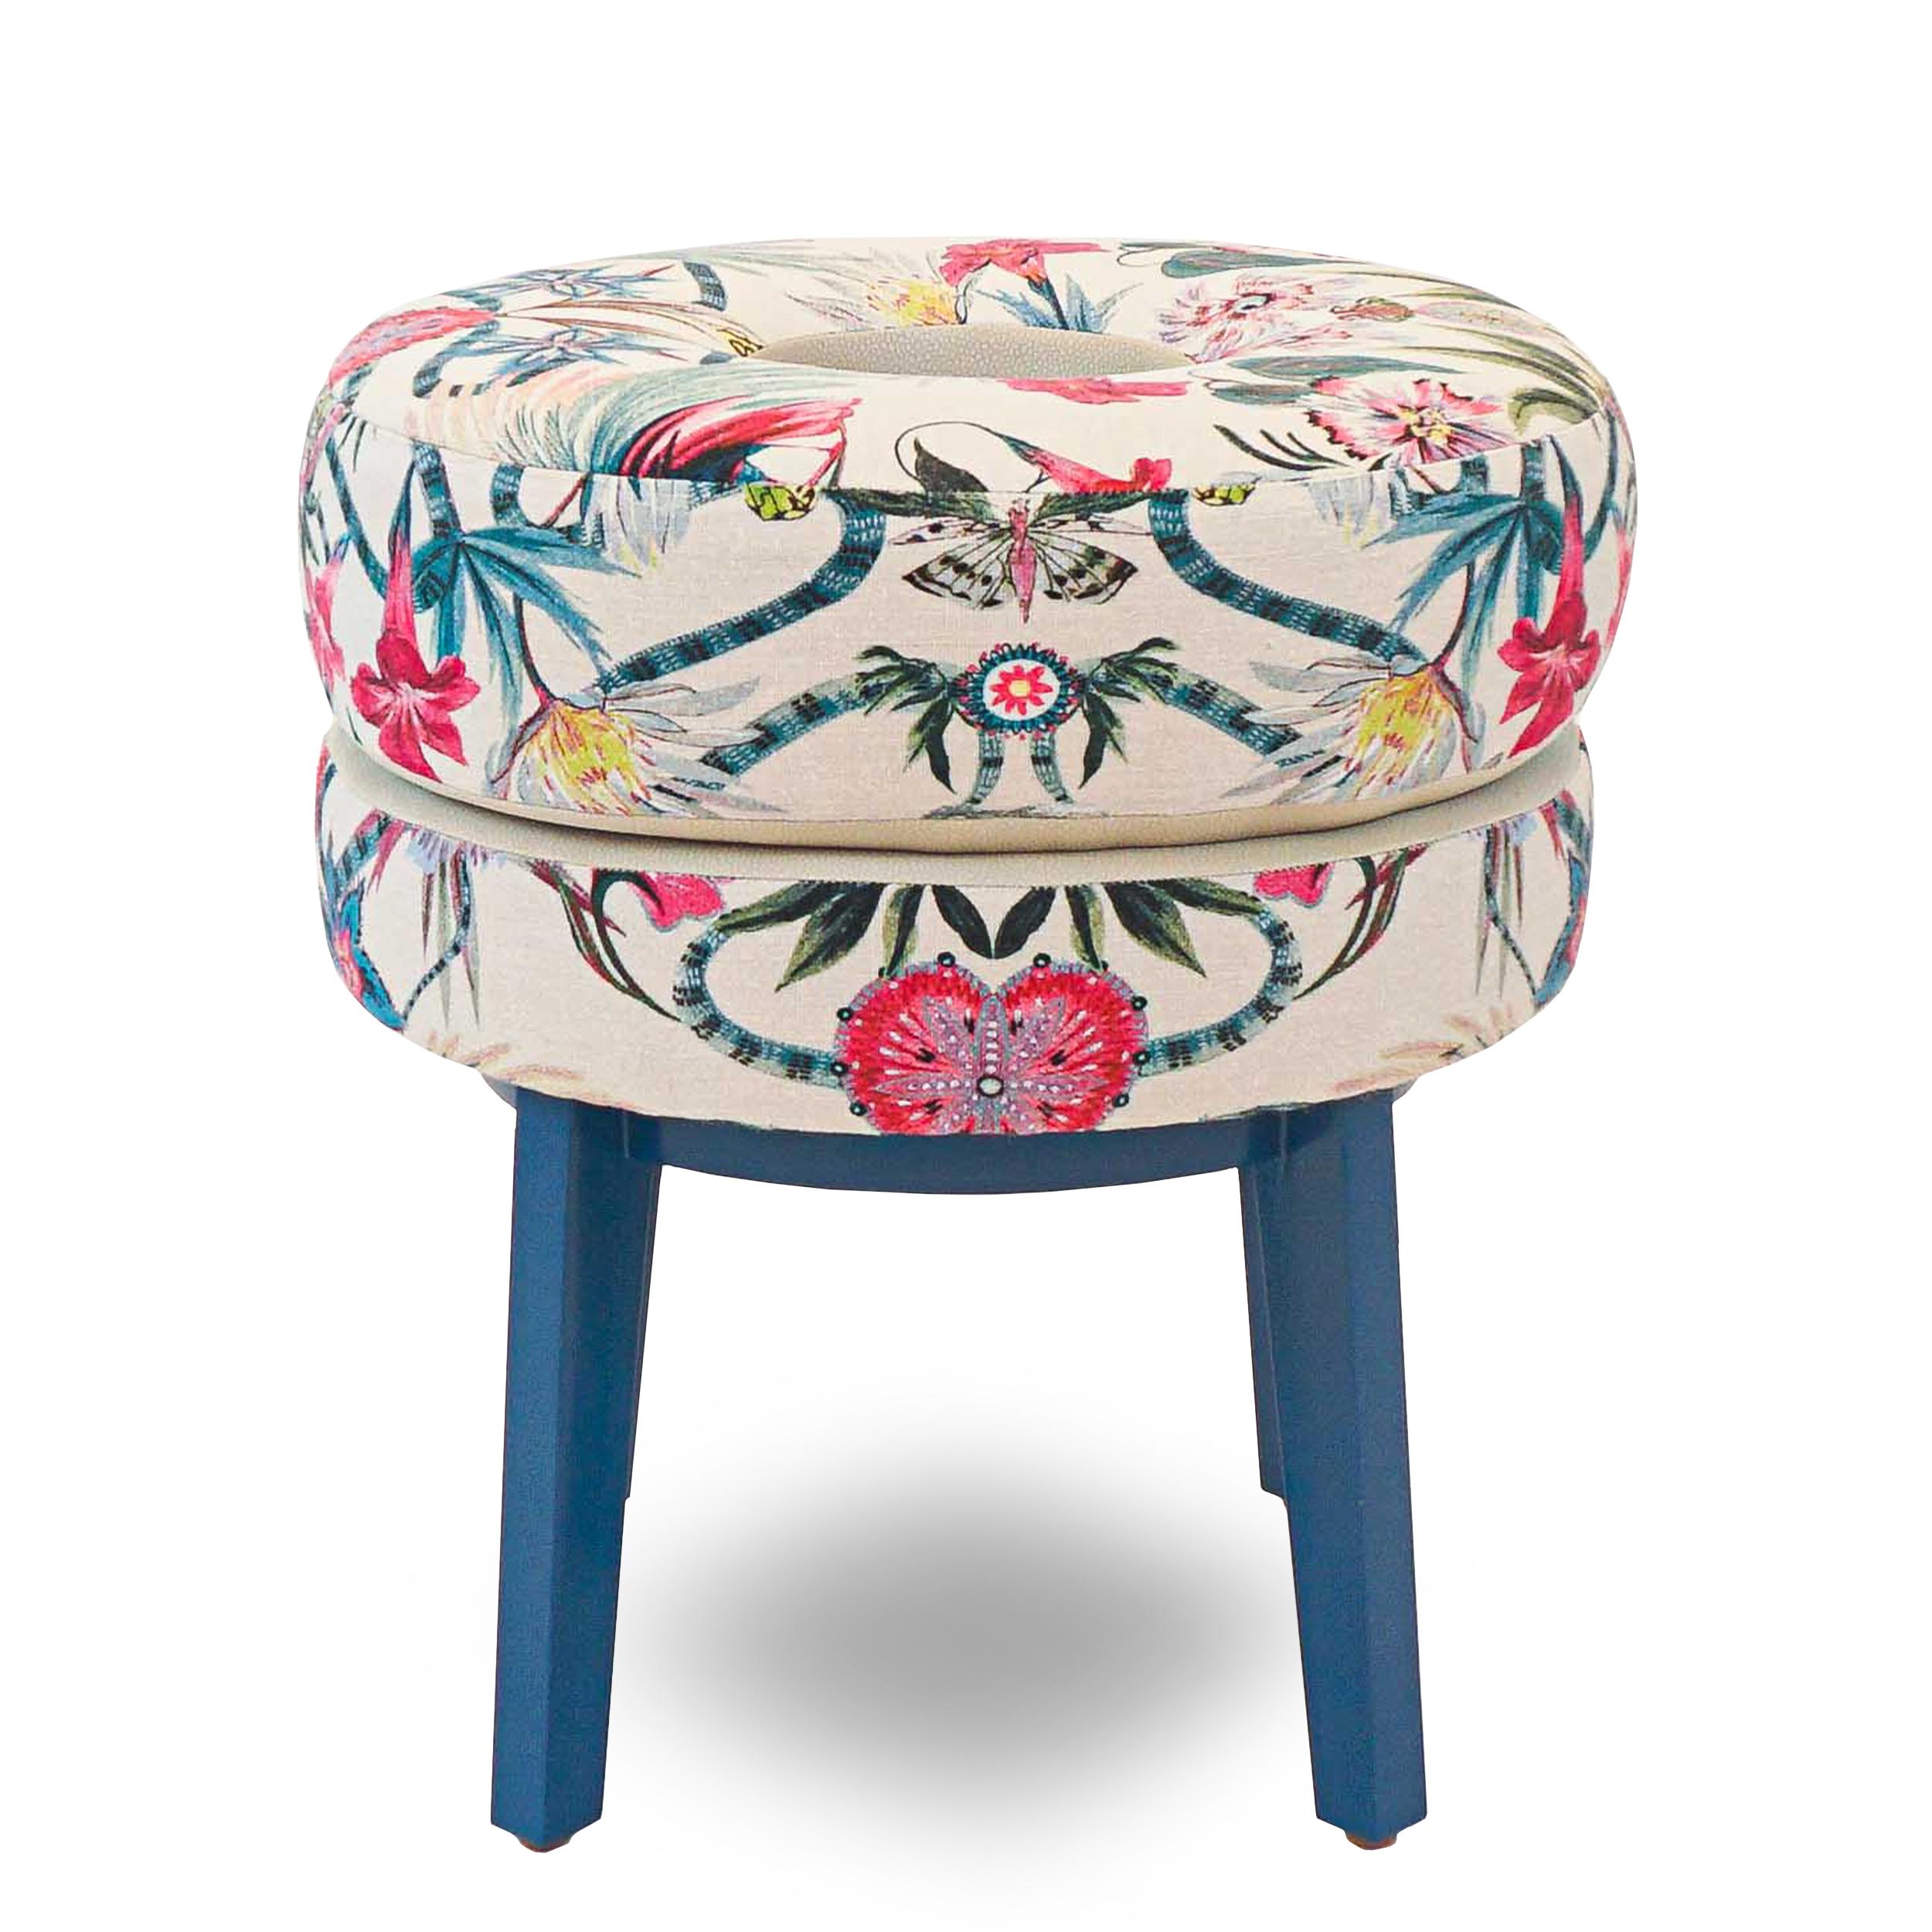 Small round stool upholstered in a Matthew Williamson woven with a colorful Menagerie print. Made with poplar wood, legs are lacquered in a vibrant blue. Sturdy base with a comfortable foam cushion seat, they are great for all ages. Check for